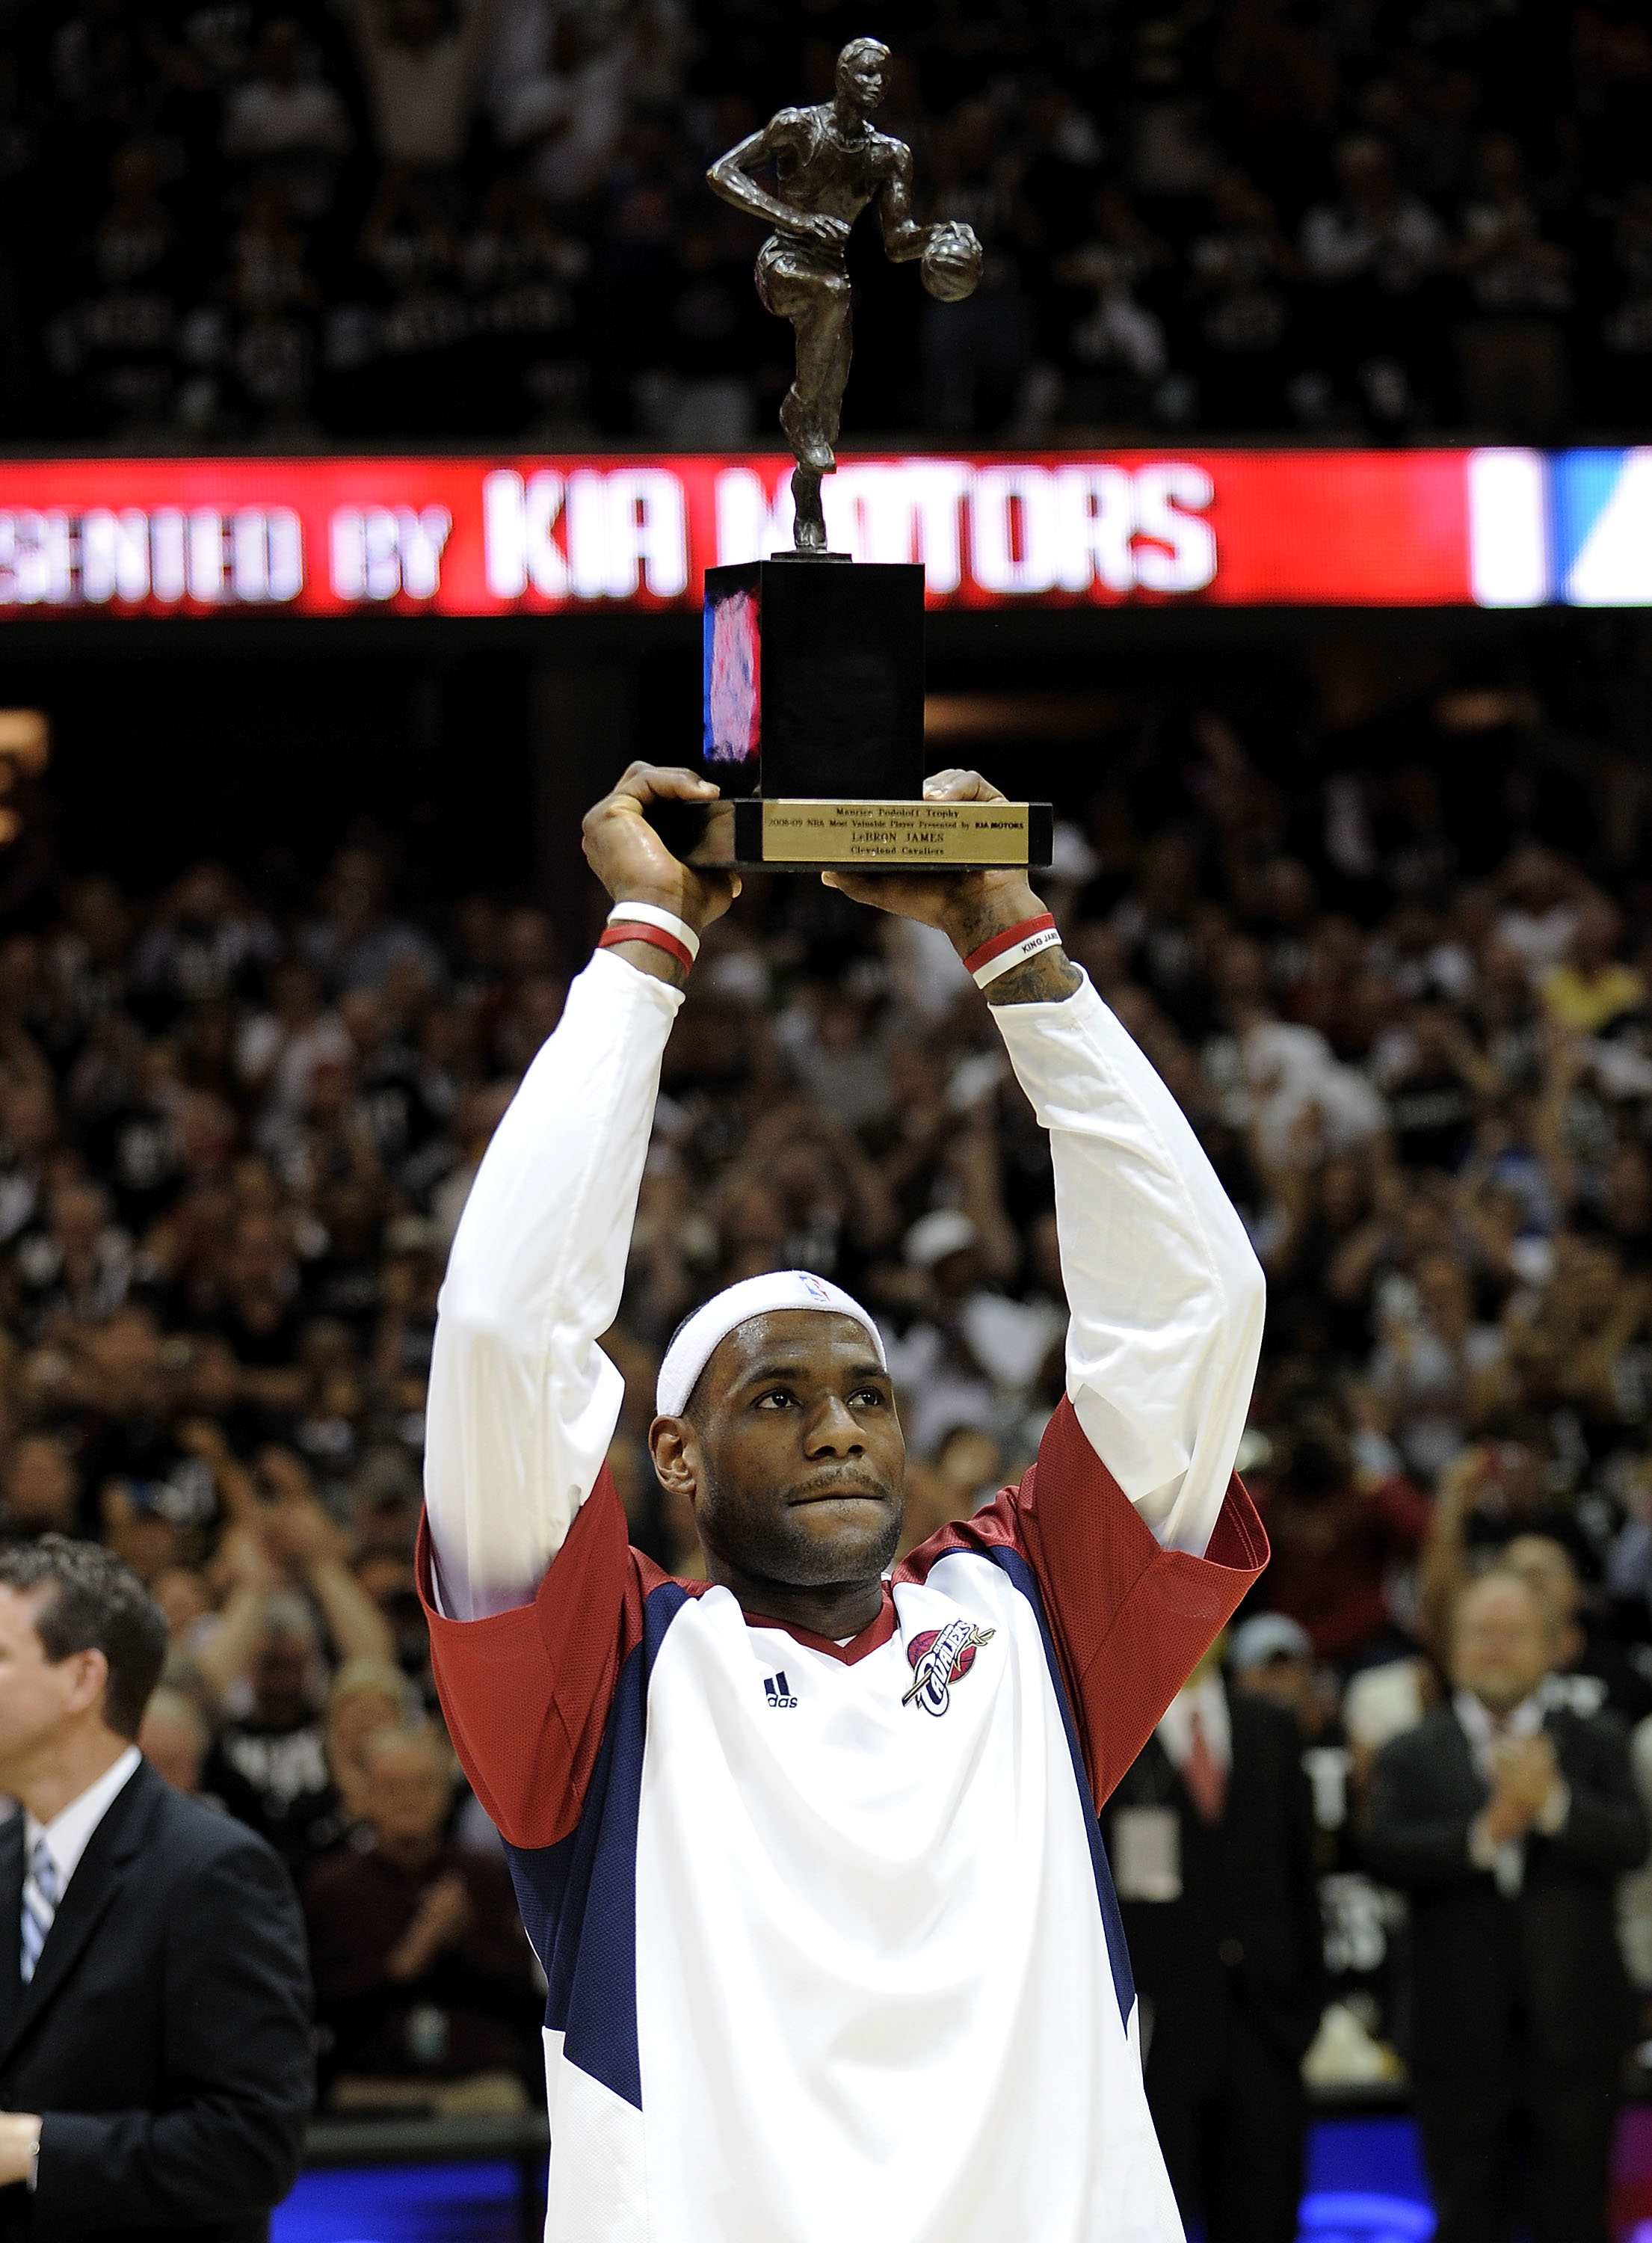 CLEVELAND - MAY 05:  LeBron James #23 of the Cleveland Cavaliers holds up the 2008-2009 MVP trophy prior playing the Atlanta Hawks in Game One of the Eastern Conference Semifinals during the 2009 NBA Playoffs at Quicken Loans Arena on May 5, 2009 in Cleve